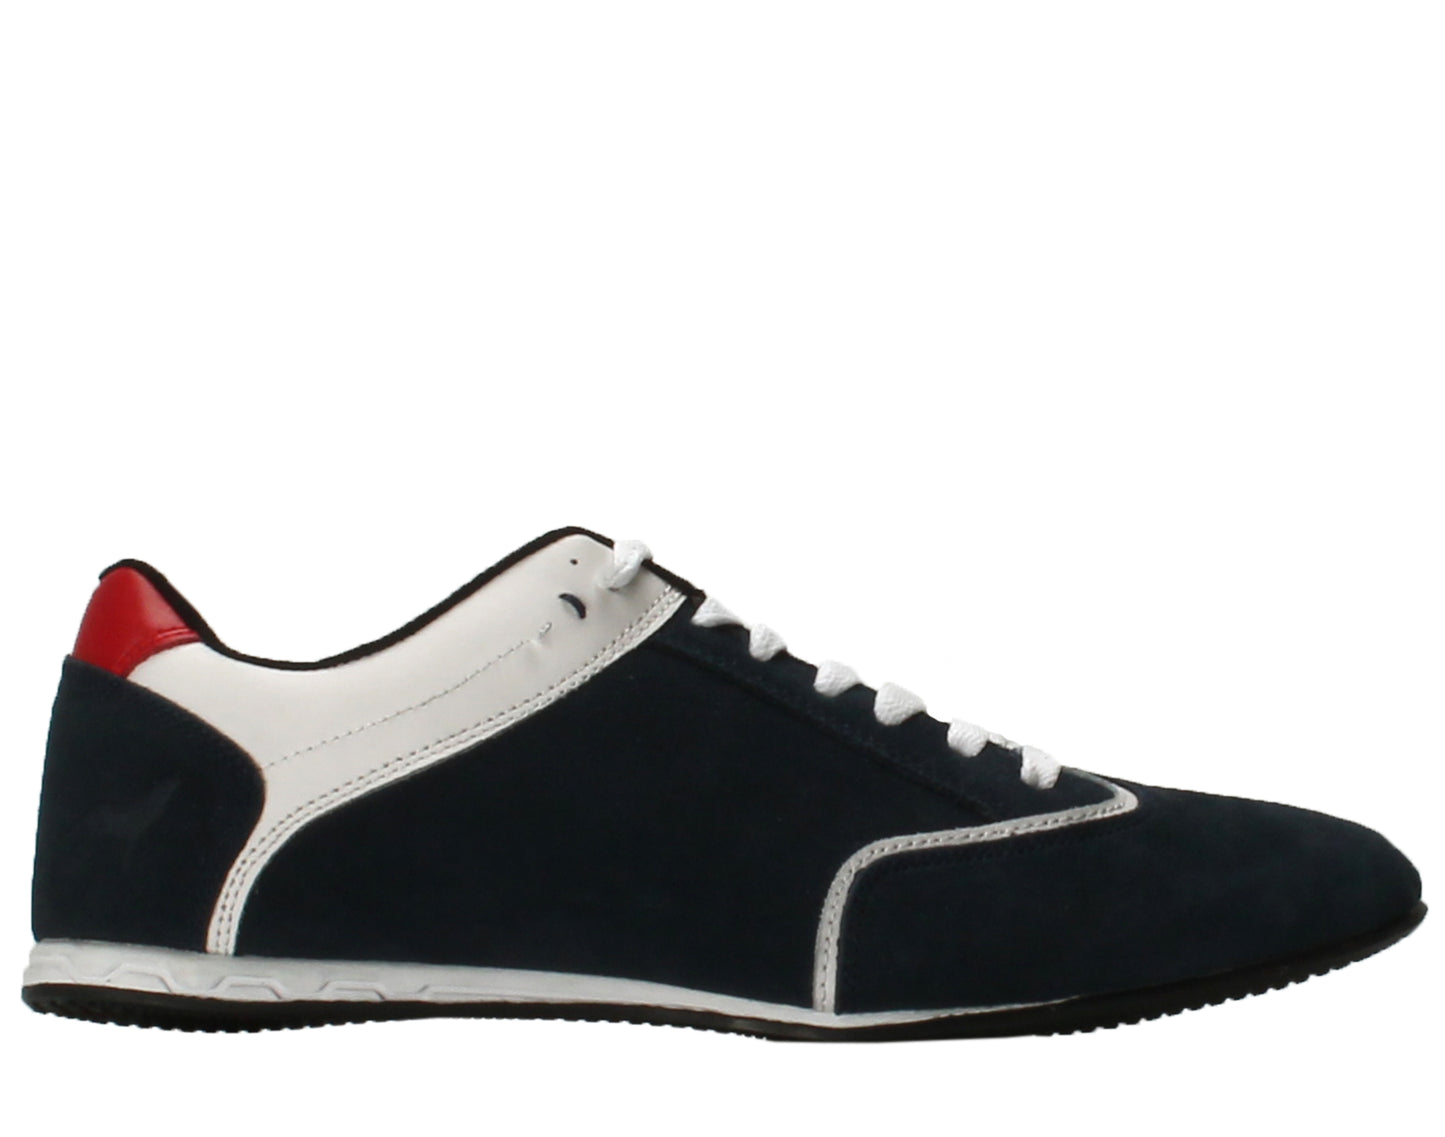 Howling Wolf Brooklyn Men's Casual Shoes